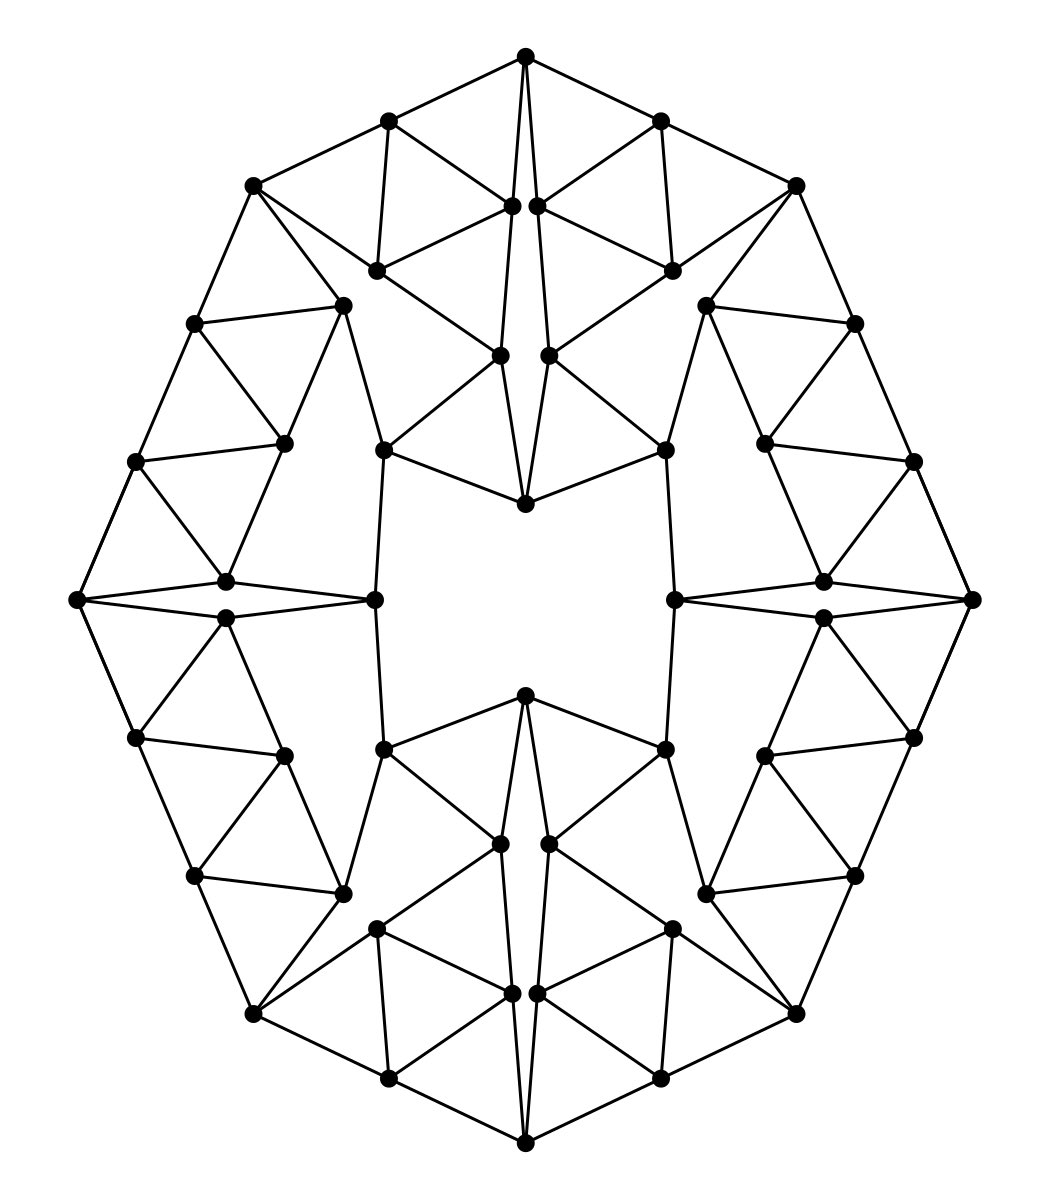 This is the Harborth graph, the simplest known planar graph in which all the edges are the same length and every vertex has exactly four neighbours.